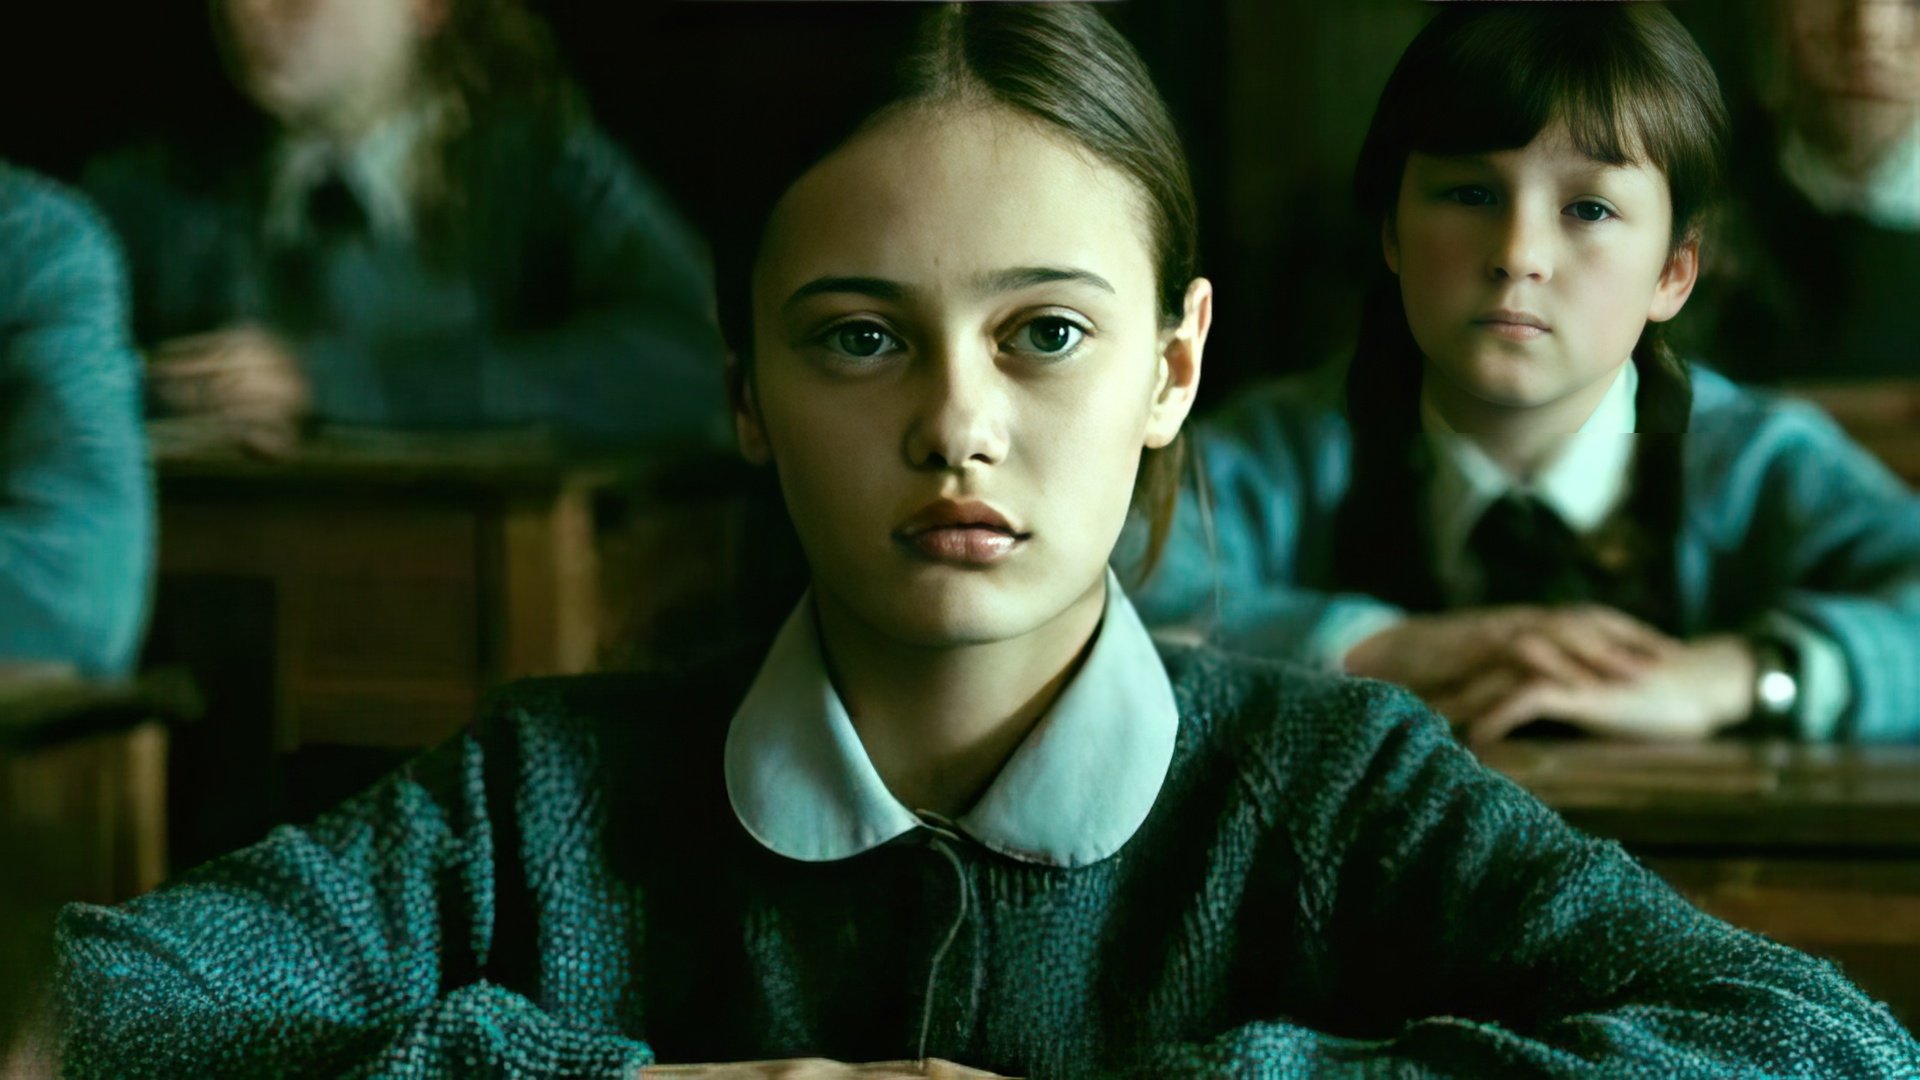 Ella Purnell's First Film Role ('Never Let Me Go', 2010)